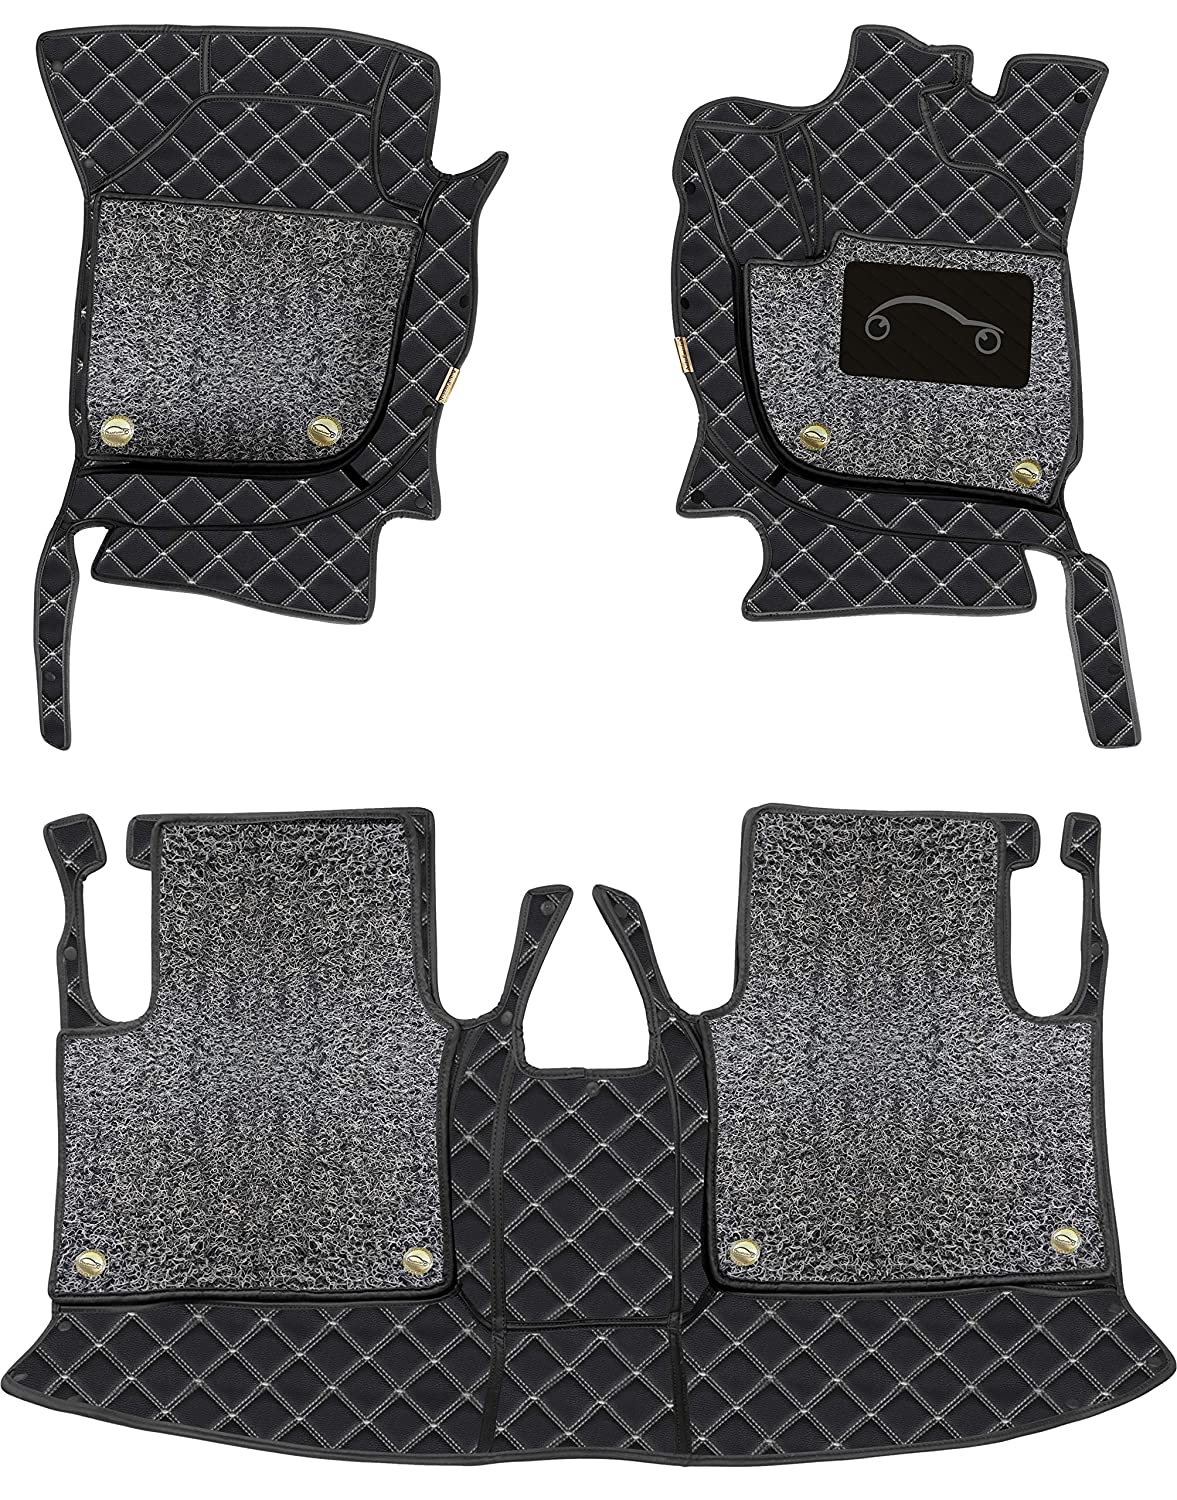 Land Rover Defender (5 Seater) 2022-7D Luxury Car Mat, All Weather Proof, Anti-Skid, 100% Waterproof & Odorless with Unique Diamond Fish Design (24mm Luxury PU Leather, 2 Rows)